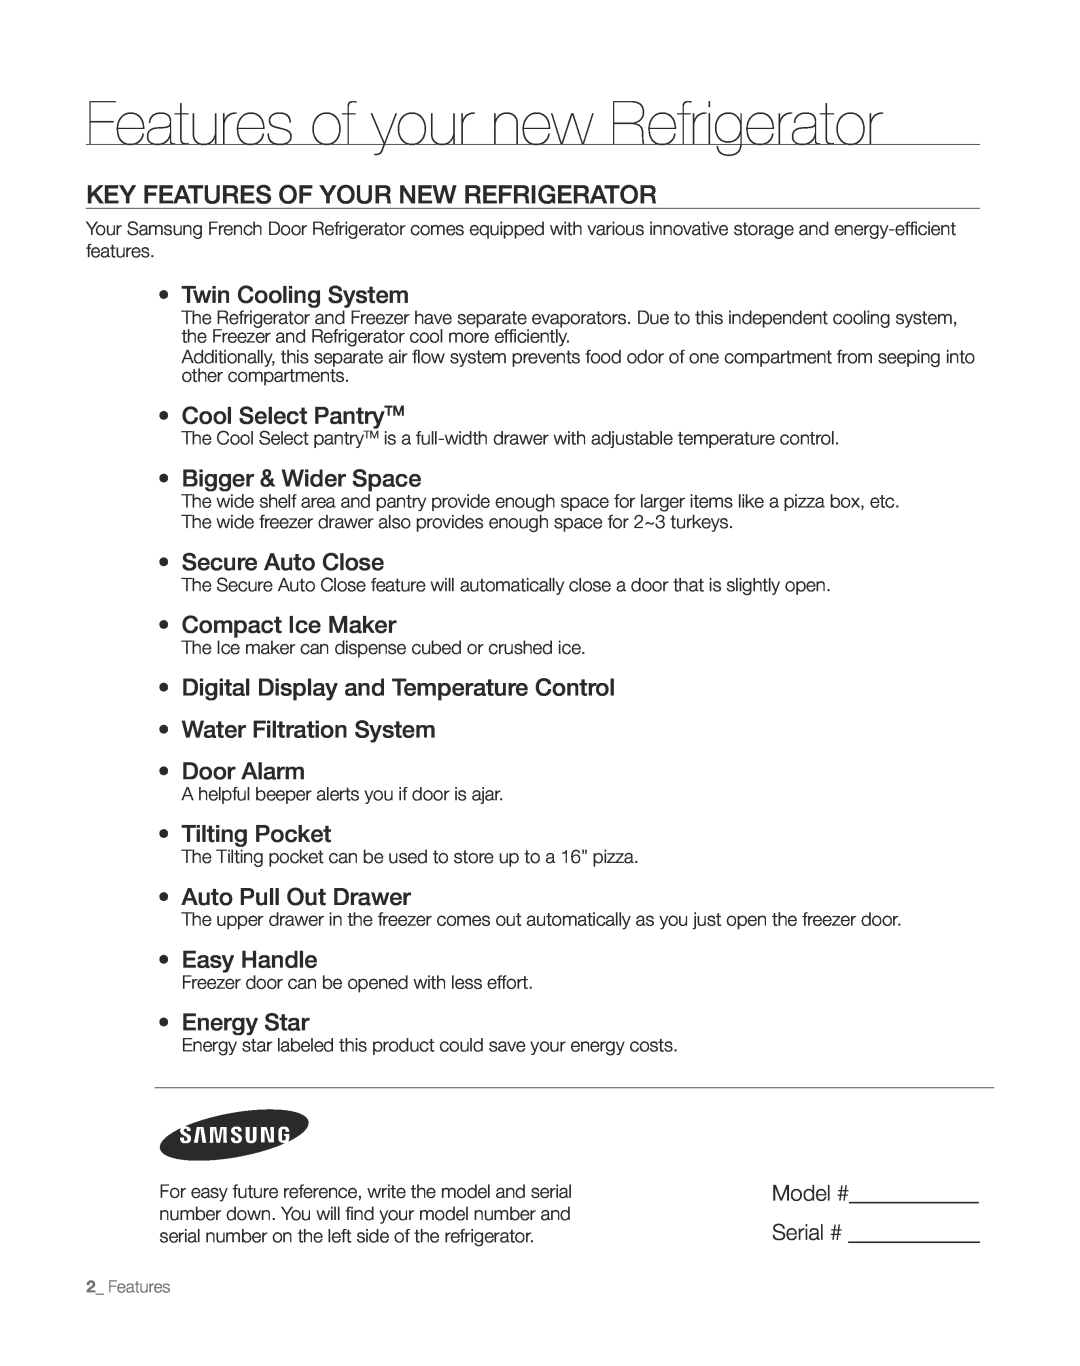 Sears RFG297AA manual Features of your new Refrigerator, Key features of your new refrigerator 